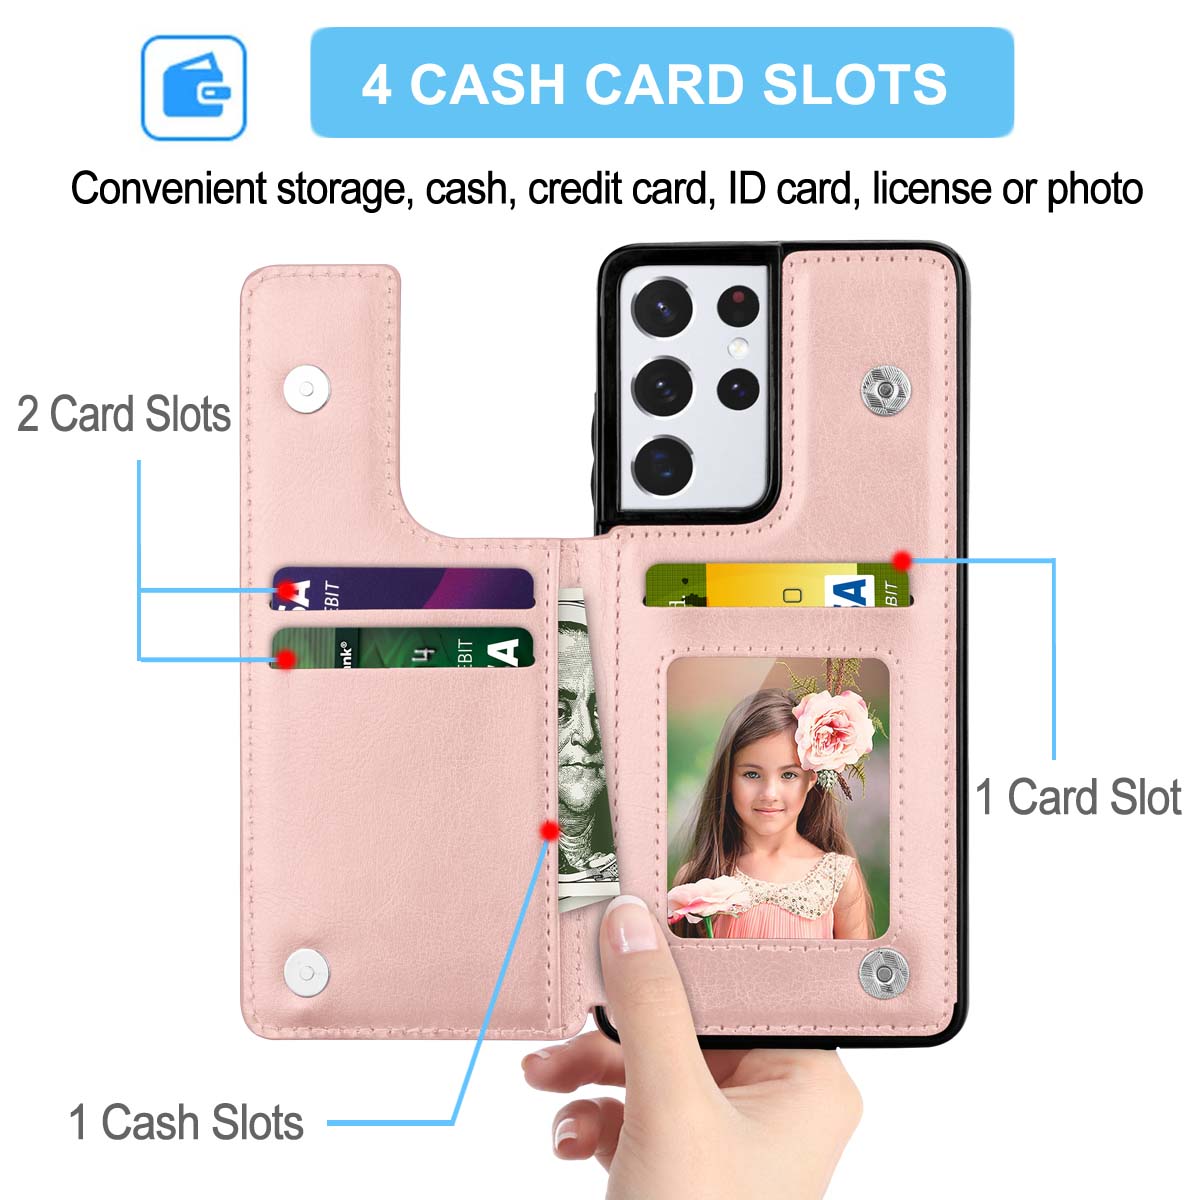 Galaxy S21 Case, Samsung Galaxy S21 Wallet Case, Takfox Shockproof PU Leather Case with Card Pockets 3 Cards Slots Cash ID Credit Card Flip Phone Cases Cover Kickstand Magnetic Hard Cases, Rose Gold - image 2 of 7